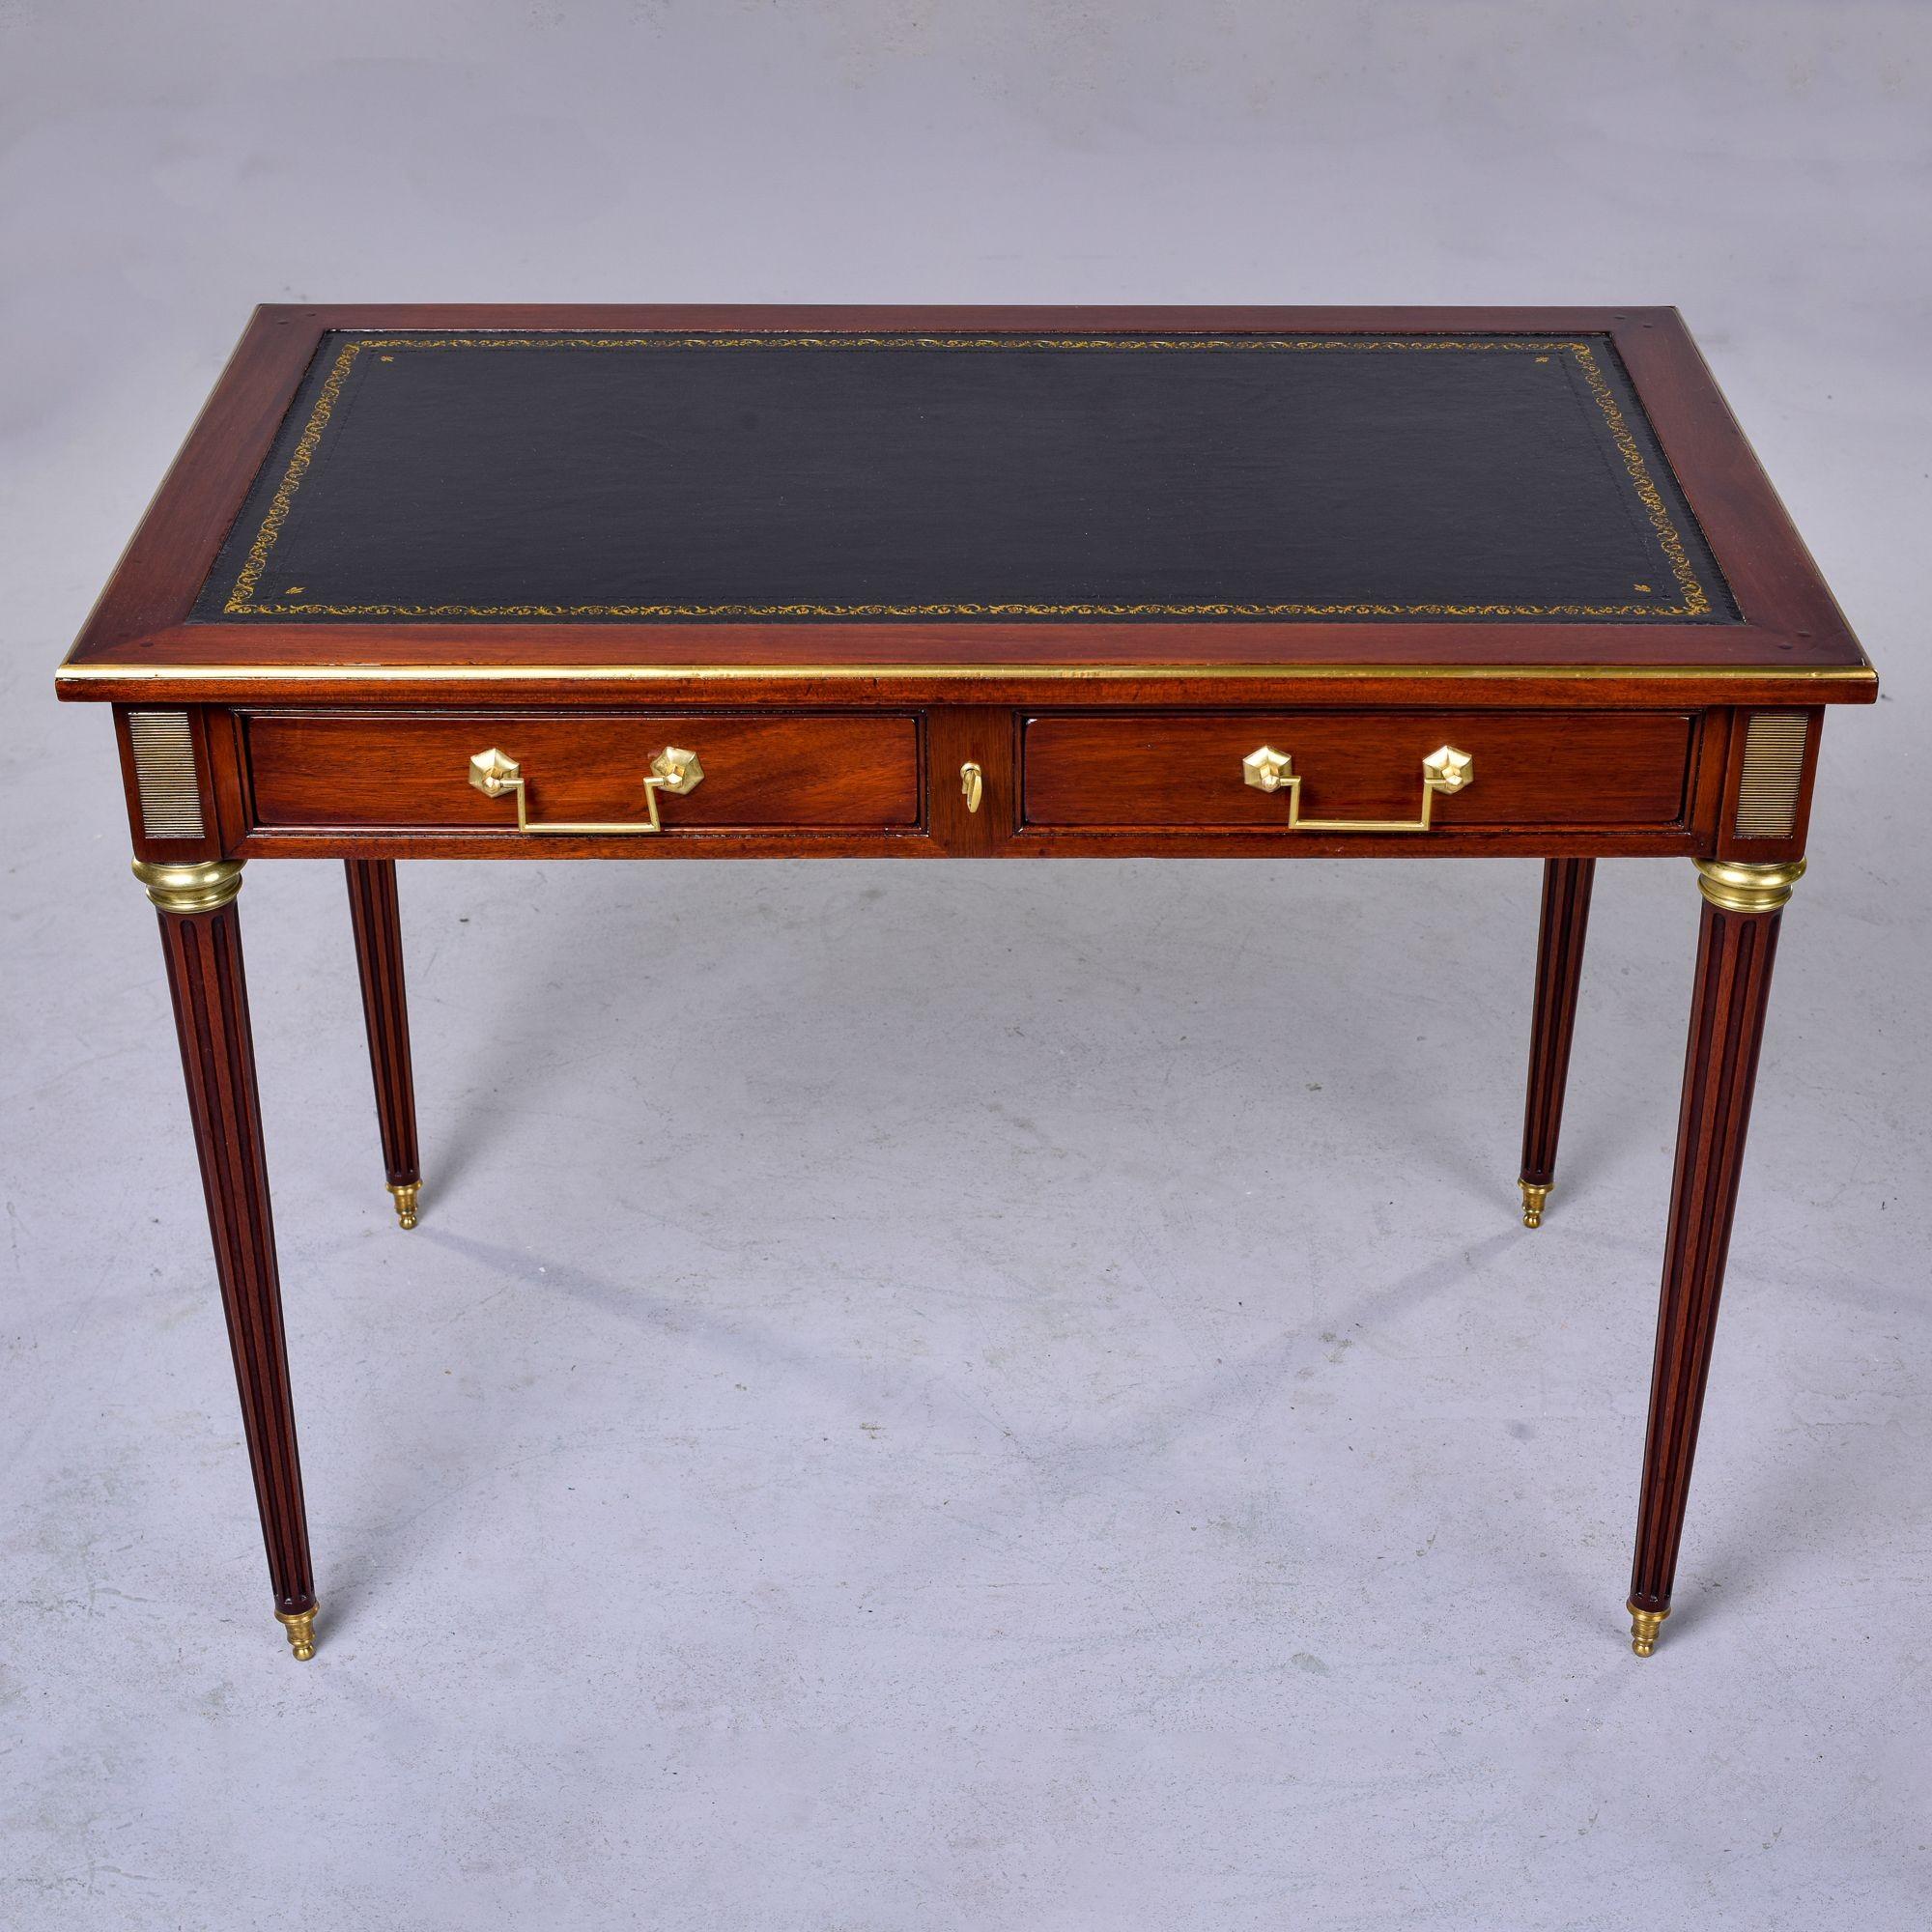 Found in France, this circa 1900 Louis Philippe style writing desk is made of mahogany. This desk features a new black leather top with gold embossed borders, decorative brass trim and hardware, two locking drawers with dovetail construction, reeded